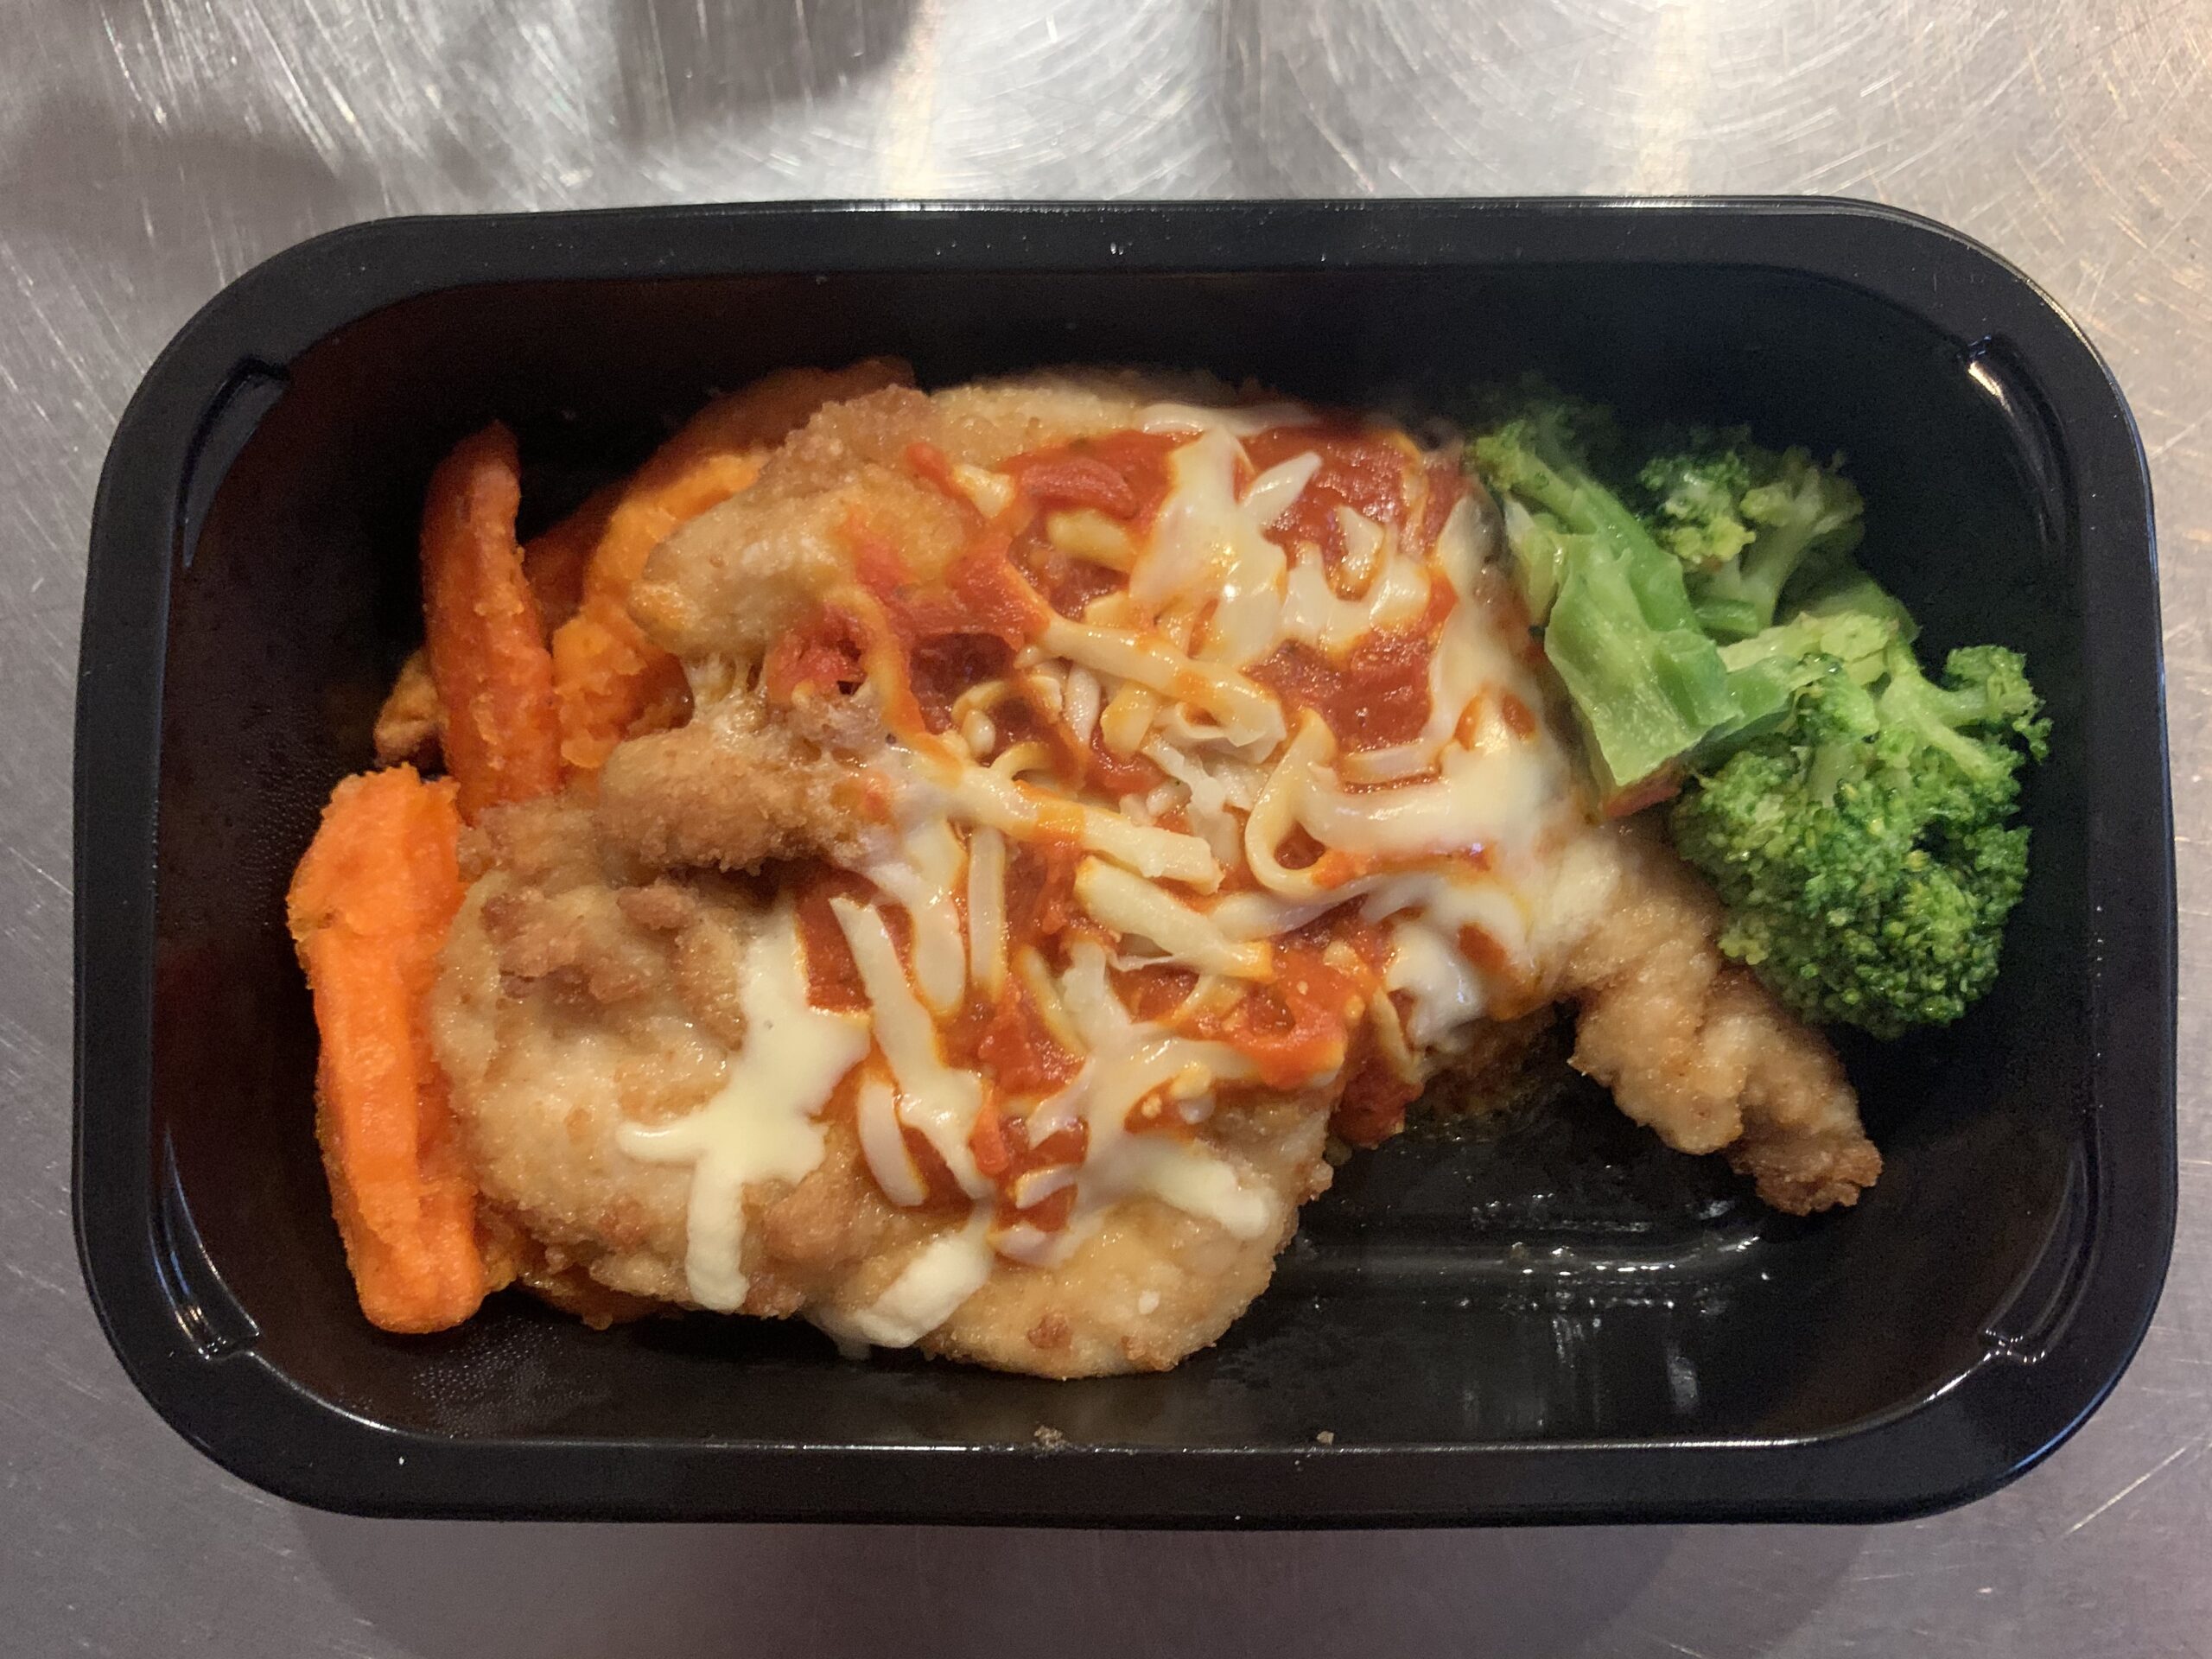 Gate Gourmet Airline Meals